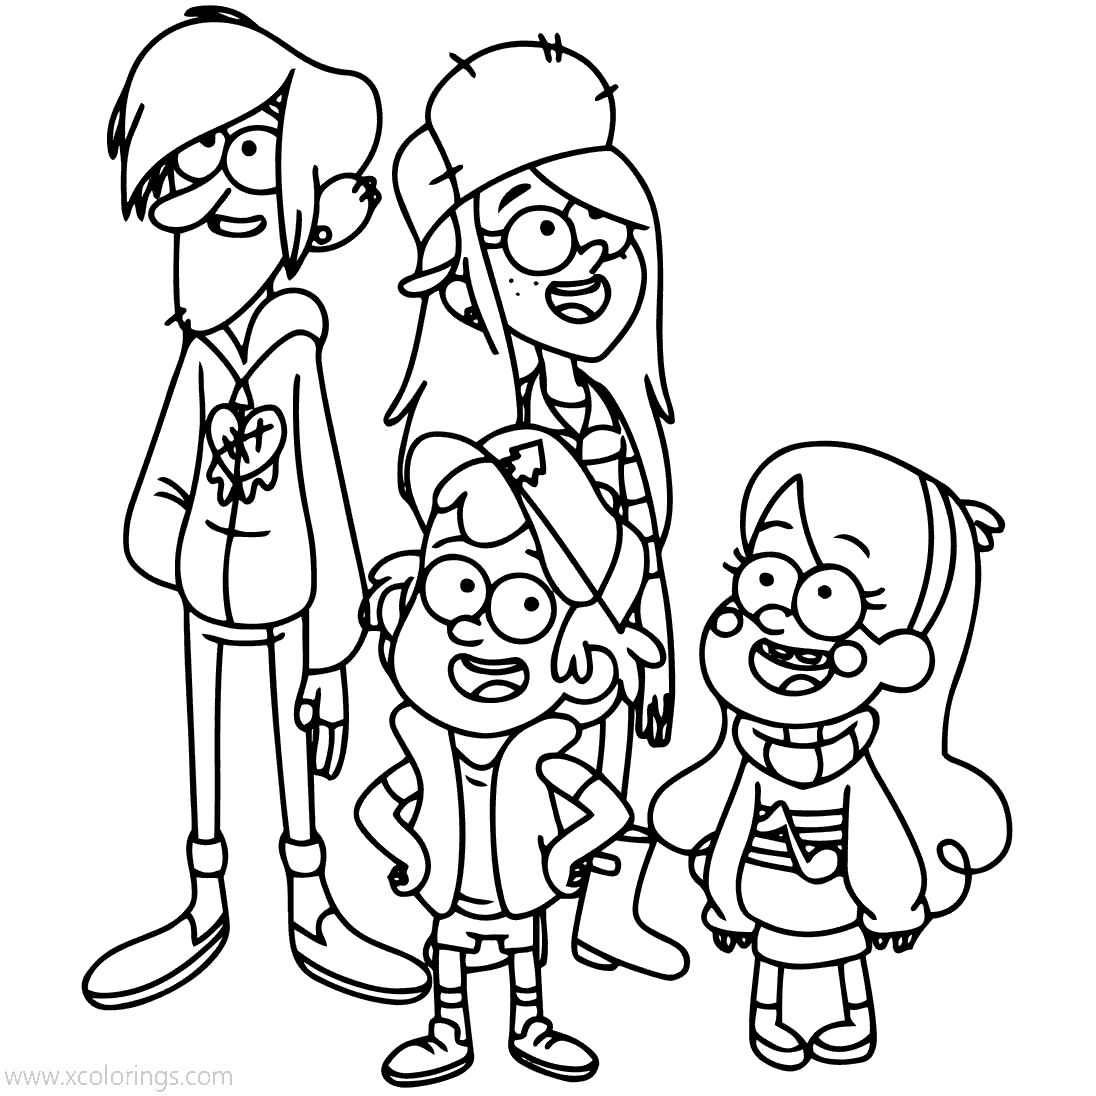 Free Gravity Falls Coloring Pages Mabel Dipper Wendy and Robbie printable